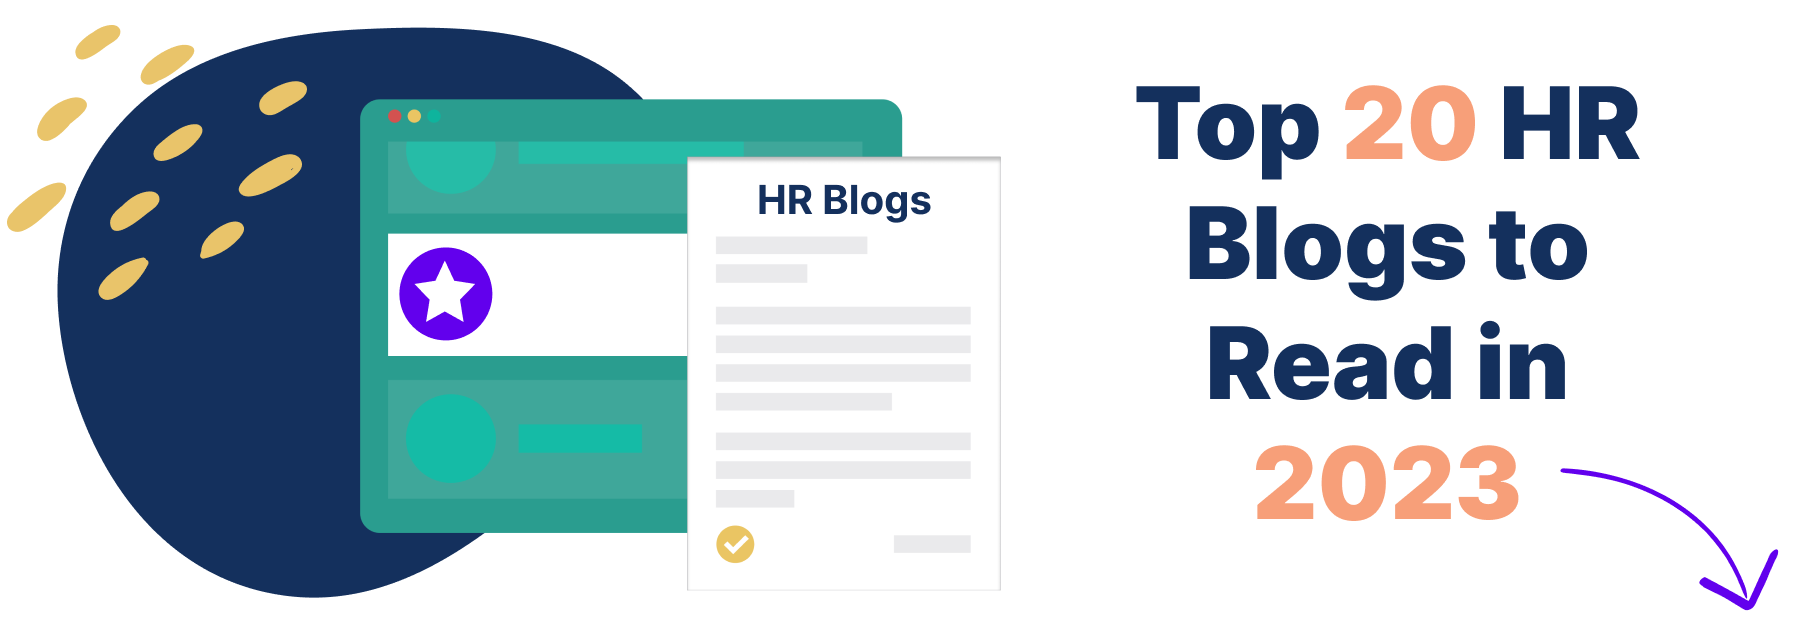 Top 20 Hr Blogs To Read In 2023